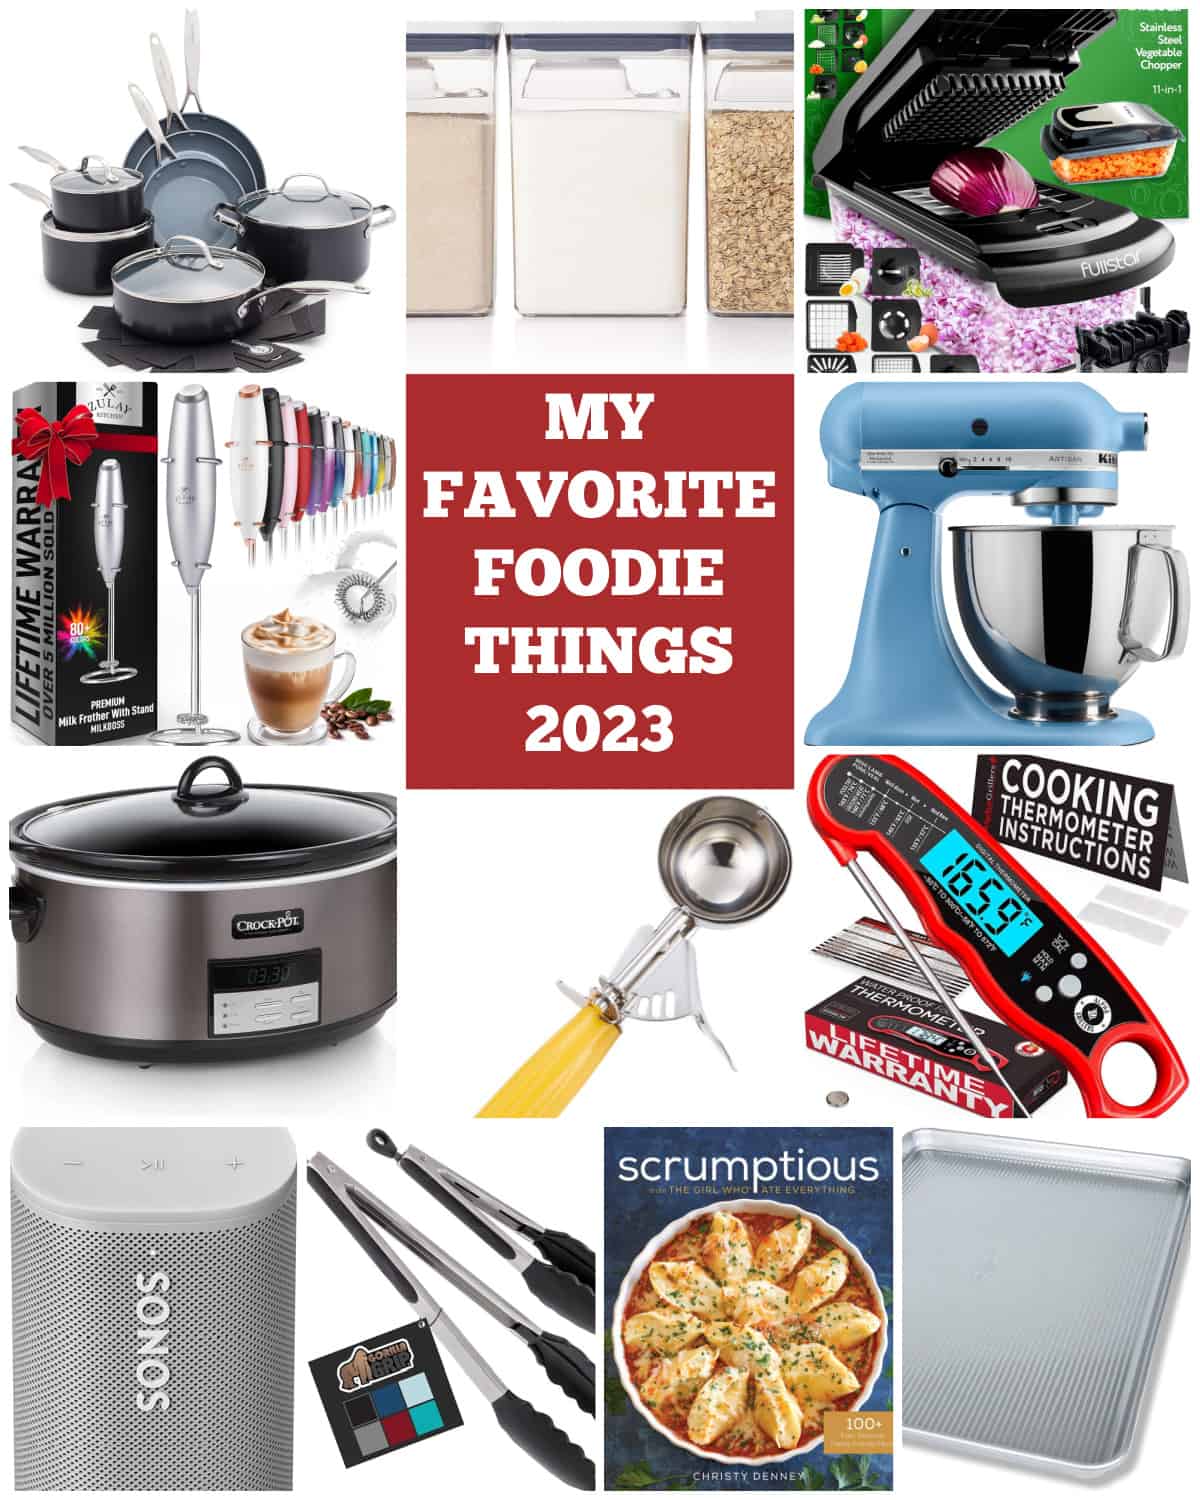 Become a better cook in 2023 with these kitchen gadgets and